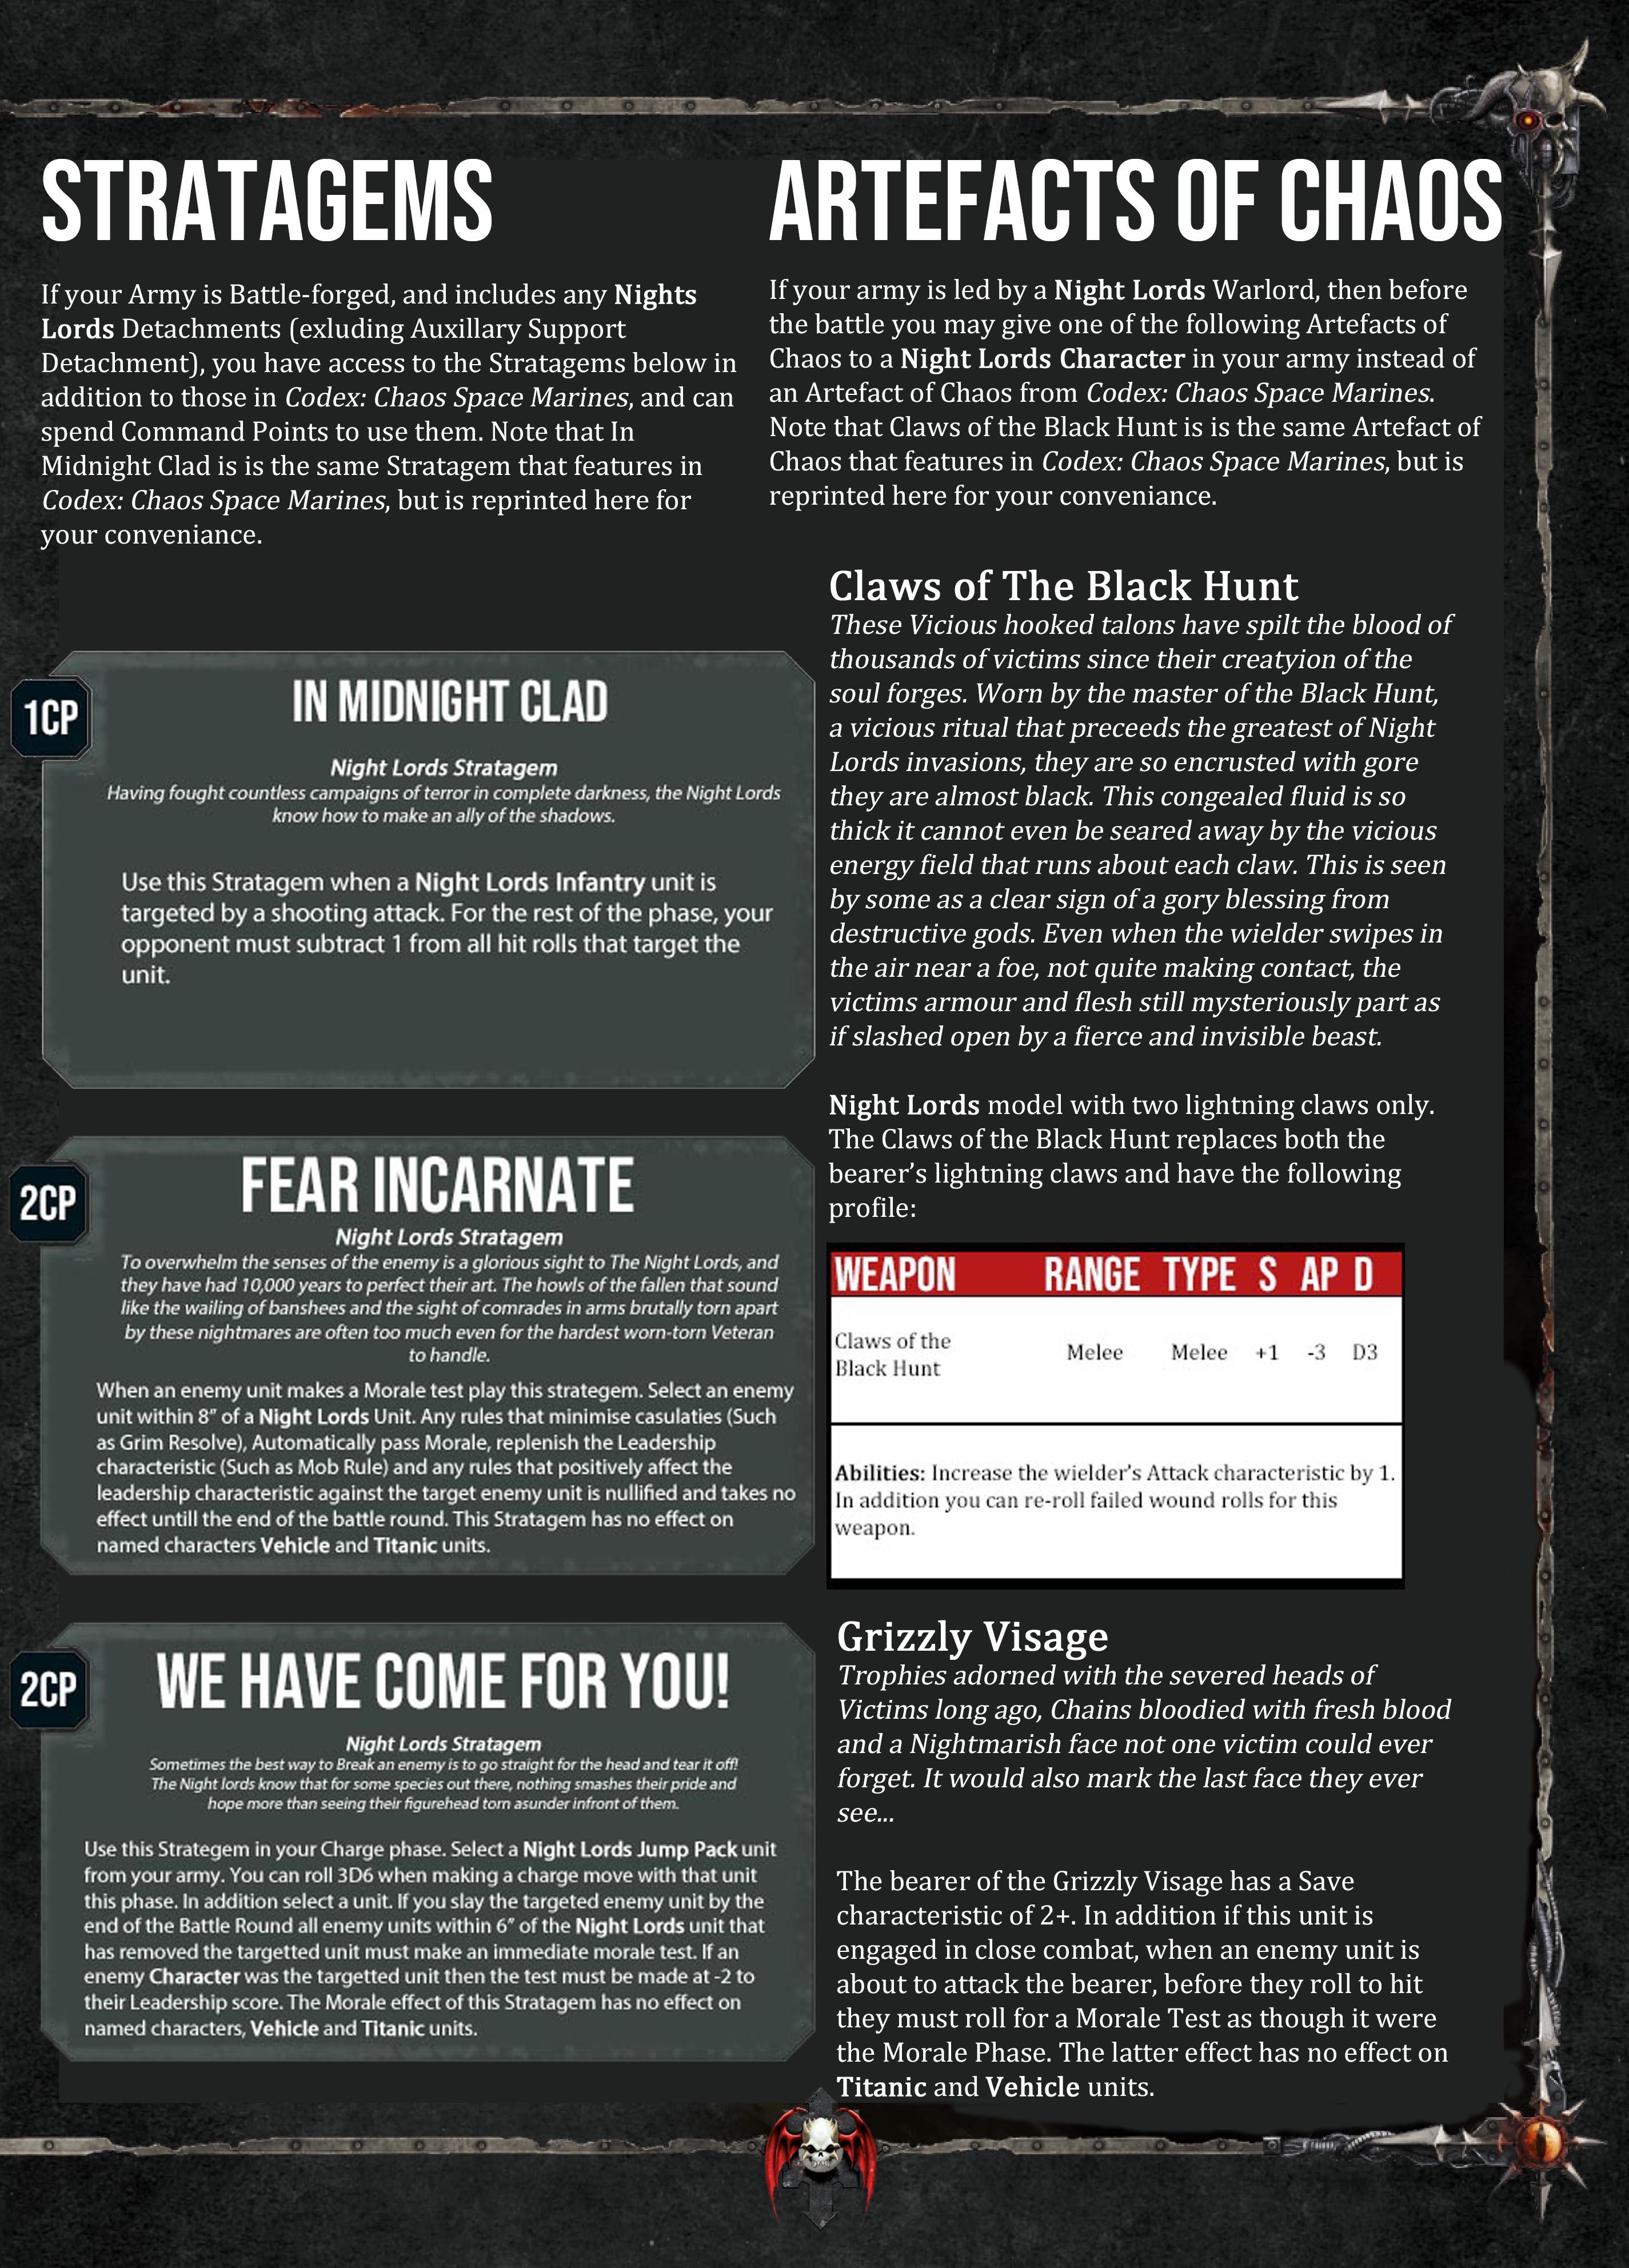 Chaos Space Marines, Heretic Astartes Warhammer 40k, Homebrew Rules, Night Lords, Proposed Rules